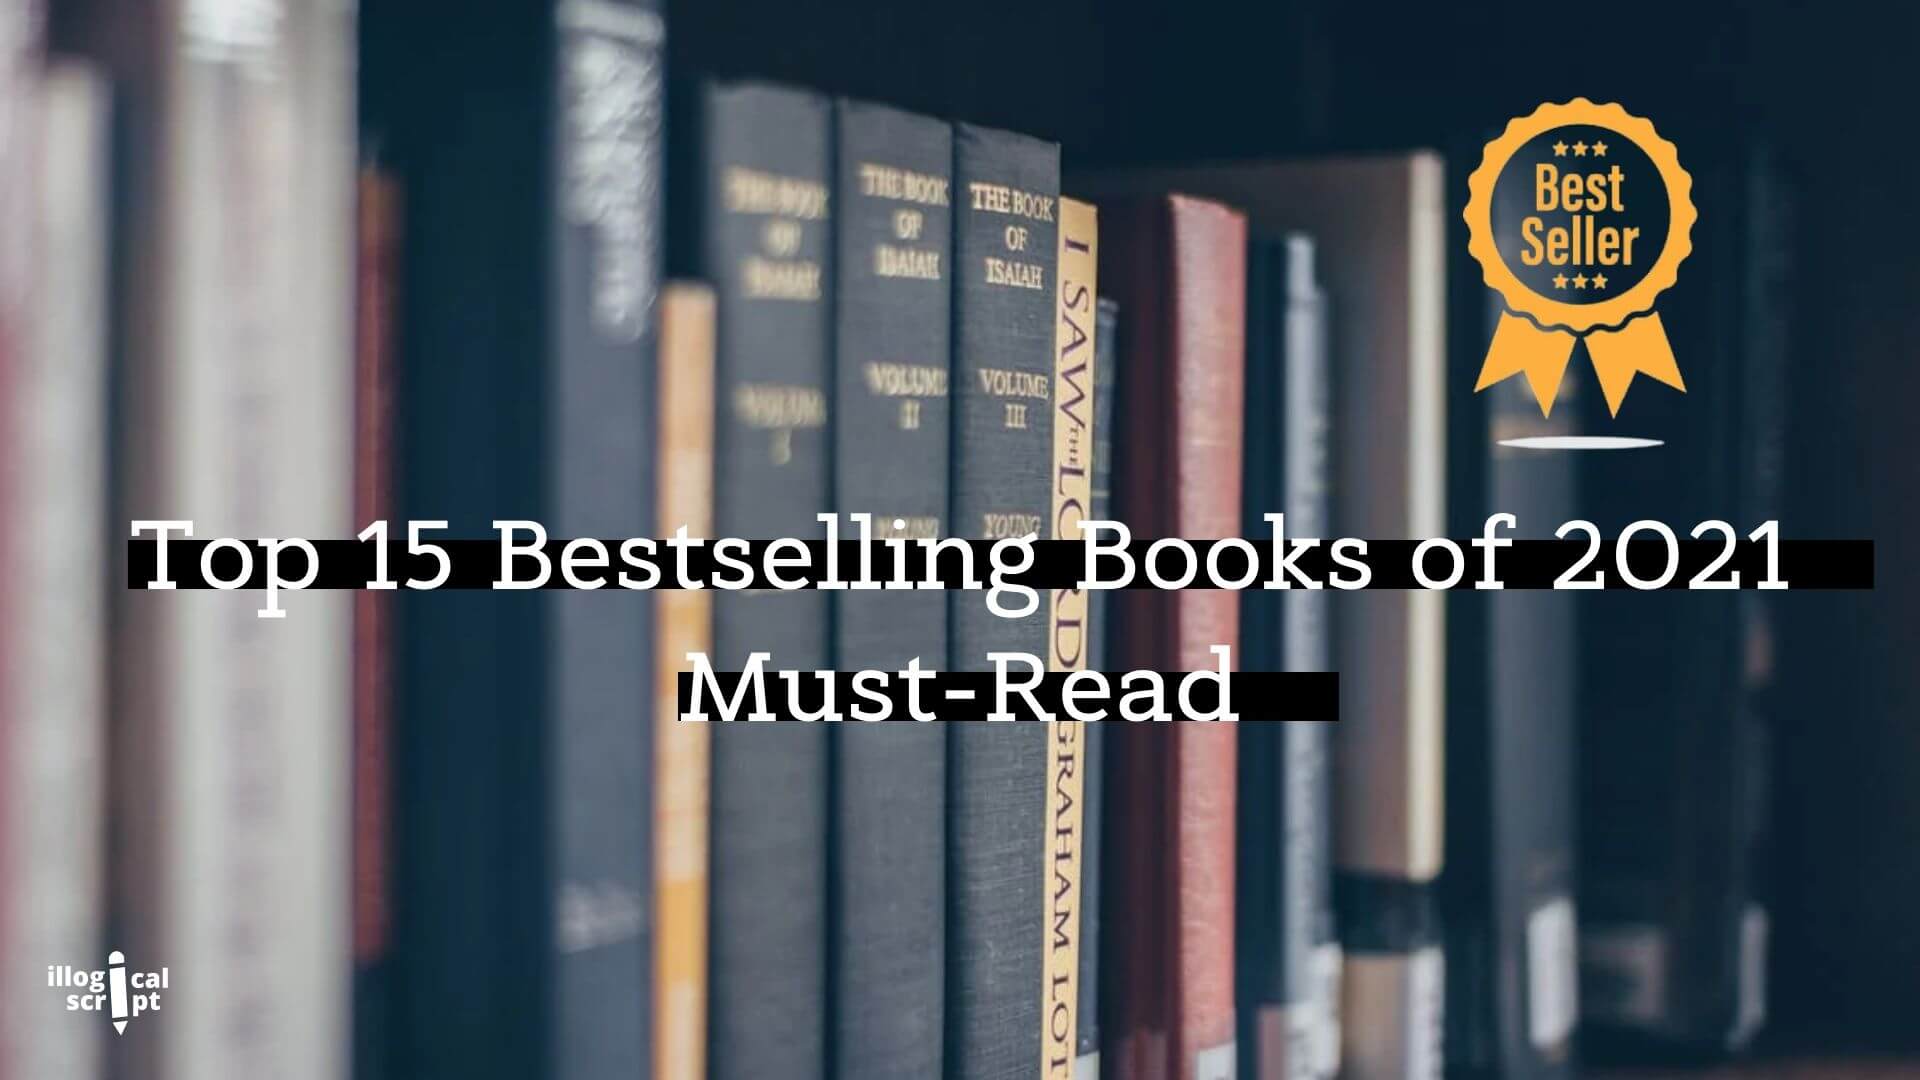 Top 15 Bestselling Books of 2021 | Must-Read